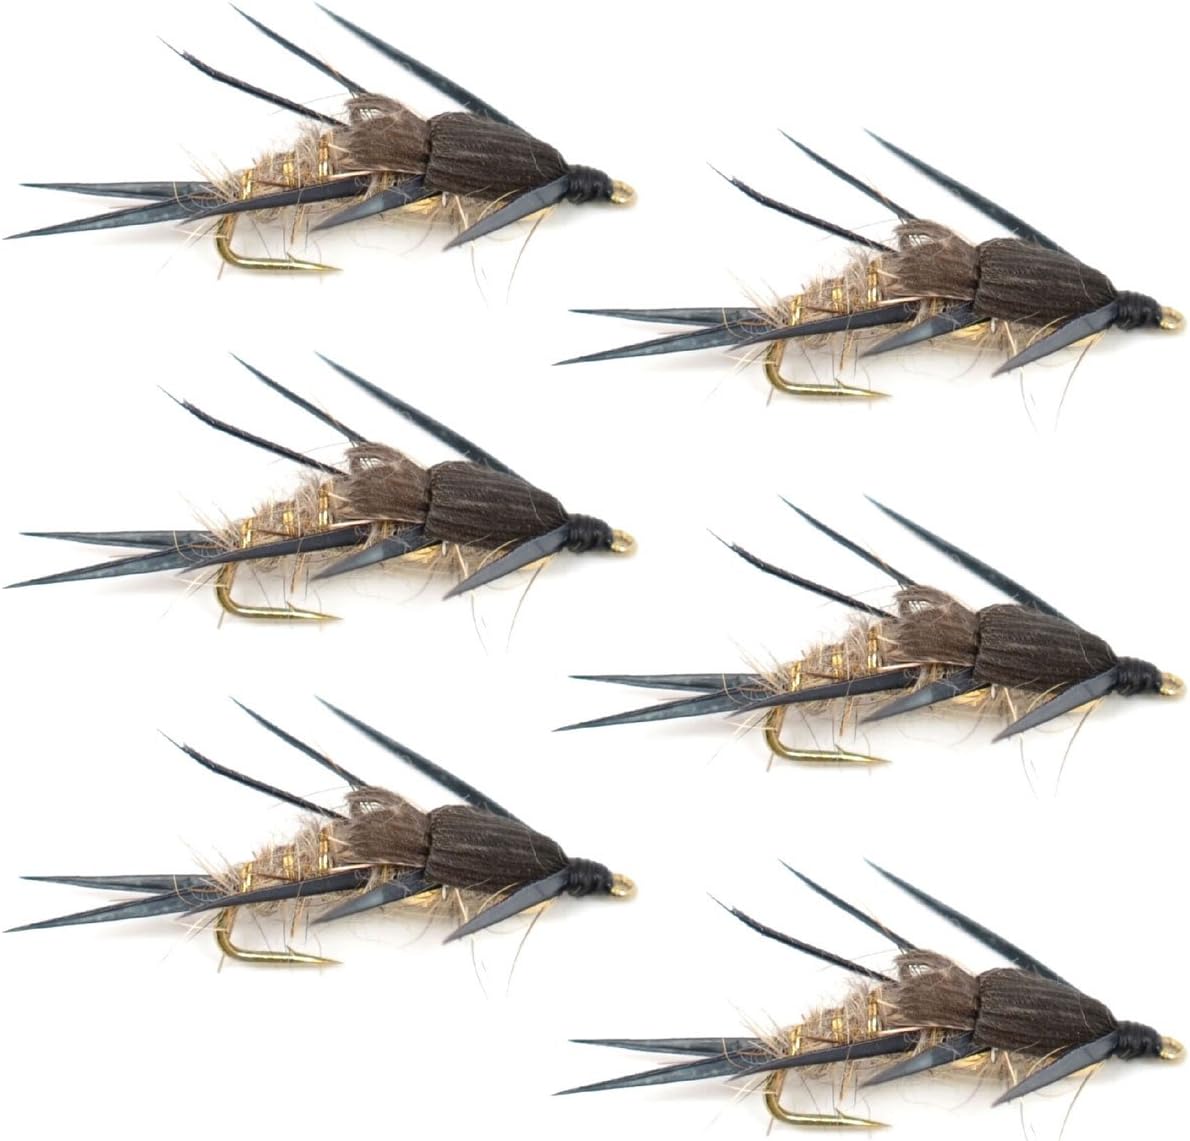 Double Bead Gold Ribbed Hare's Ear Nymph Fly Fishing Flies - Trout and Bass Wet Fly - 6 Flies Hook Size 14